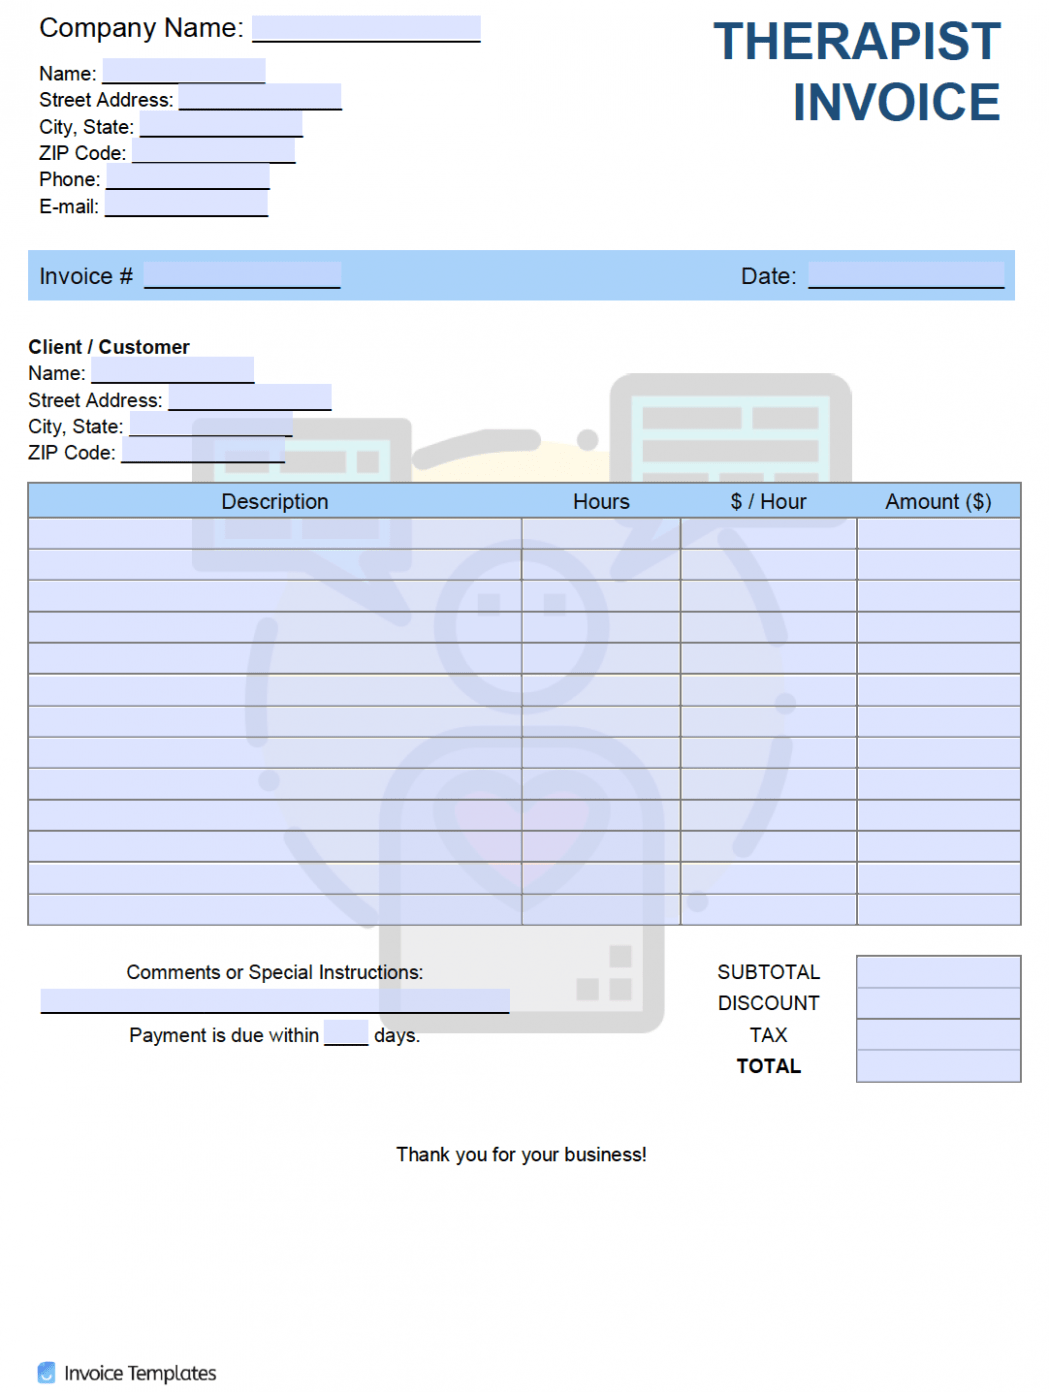 Printable Psychologist Invoice Template 